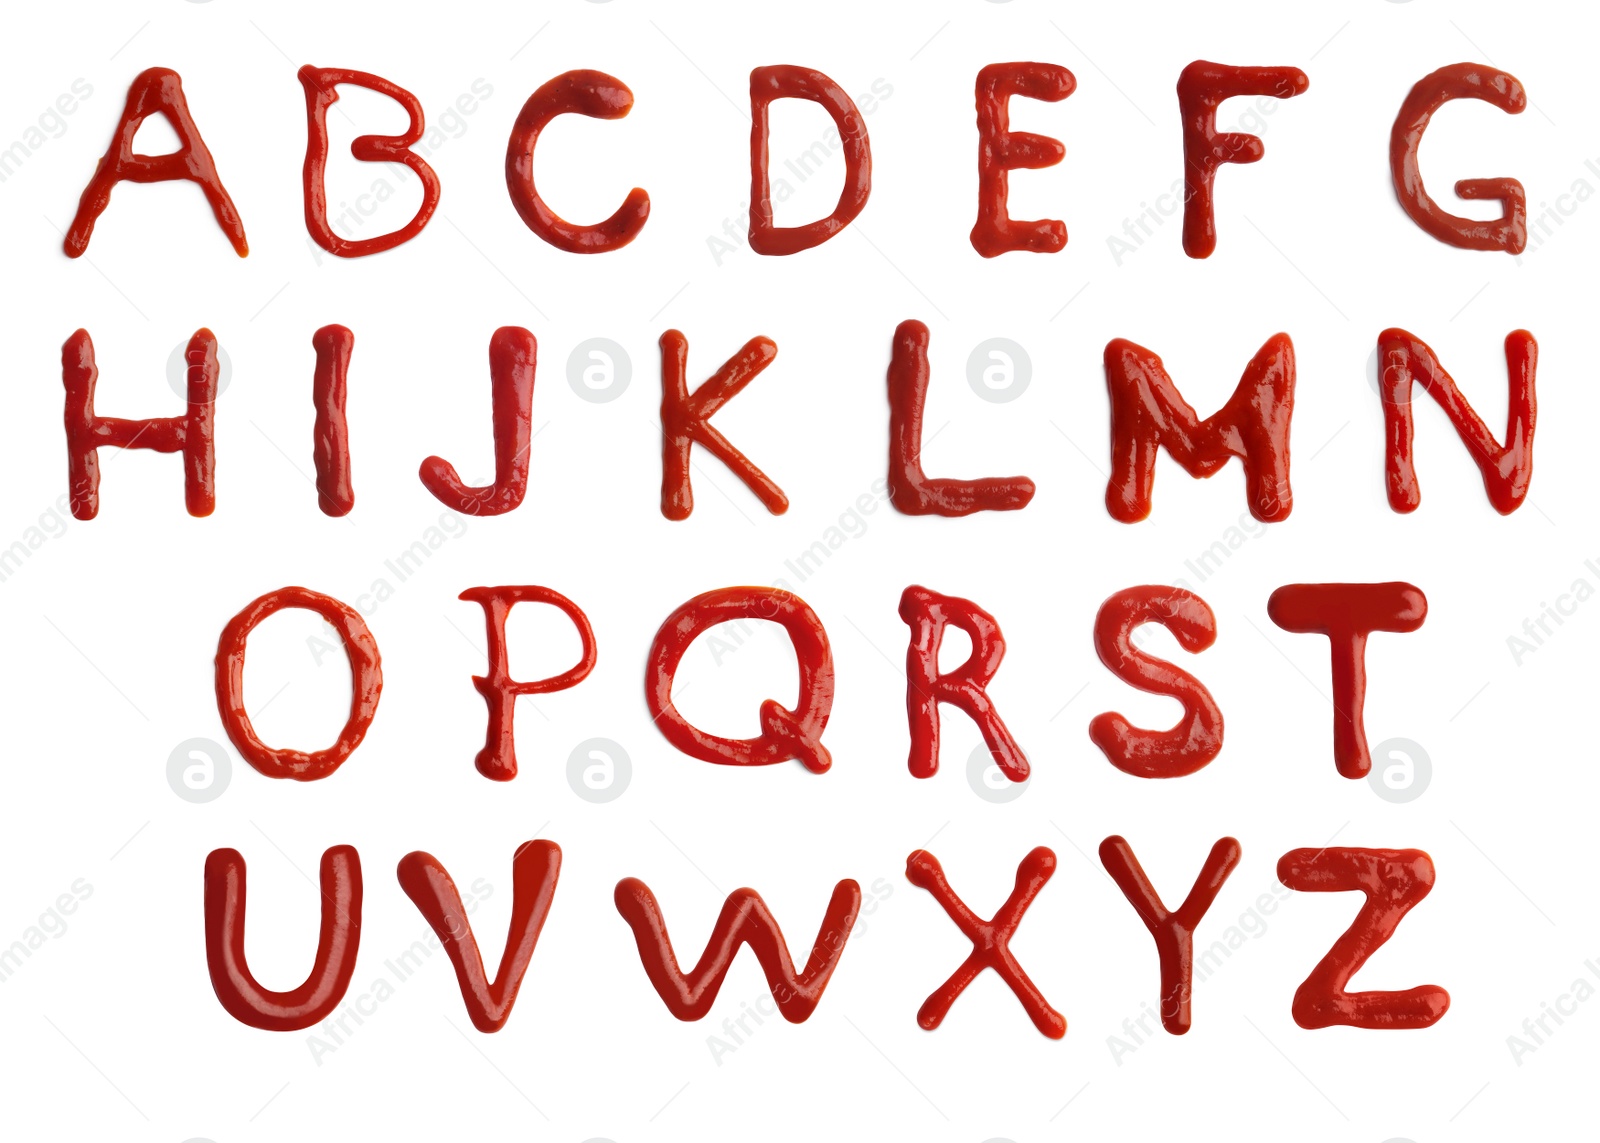 Image of Alphabet made of ketchup on white background